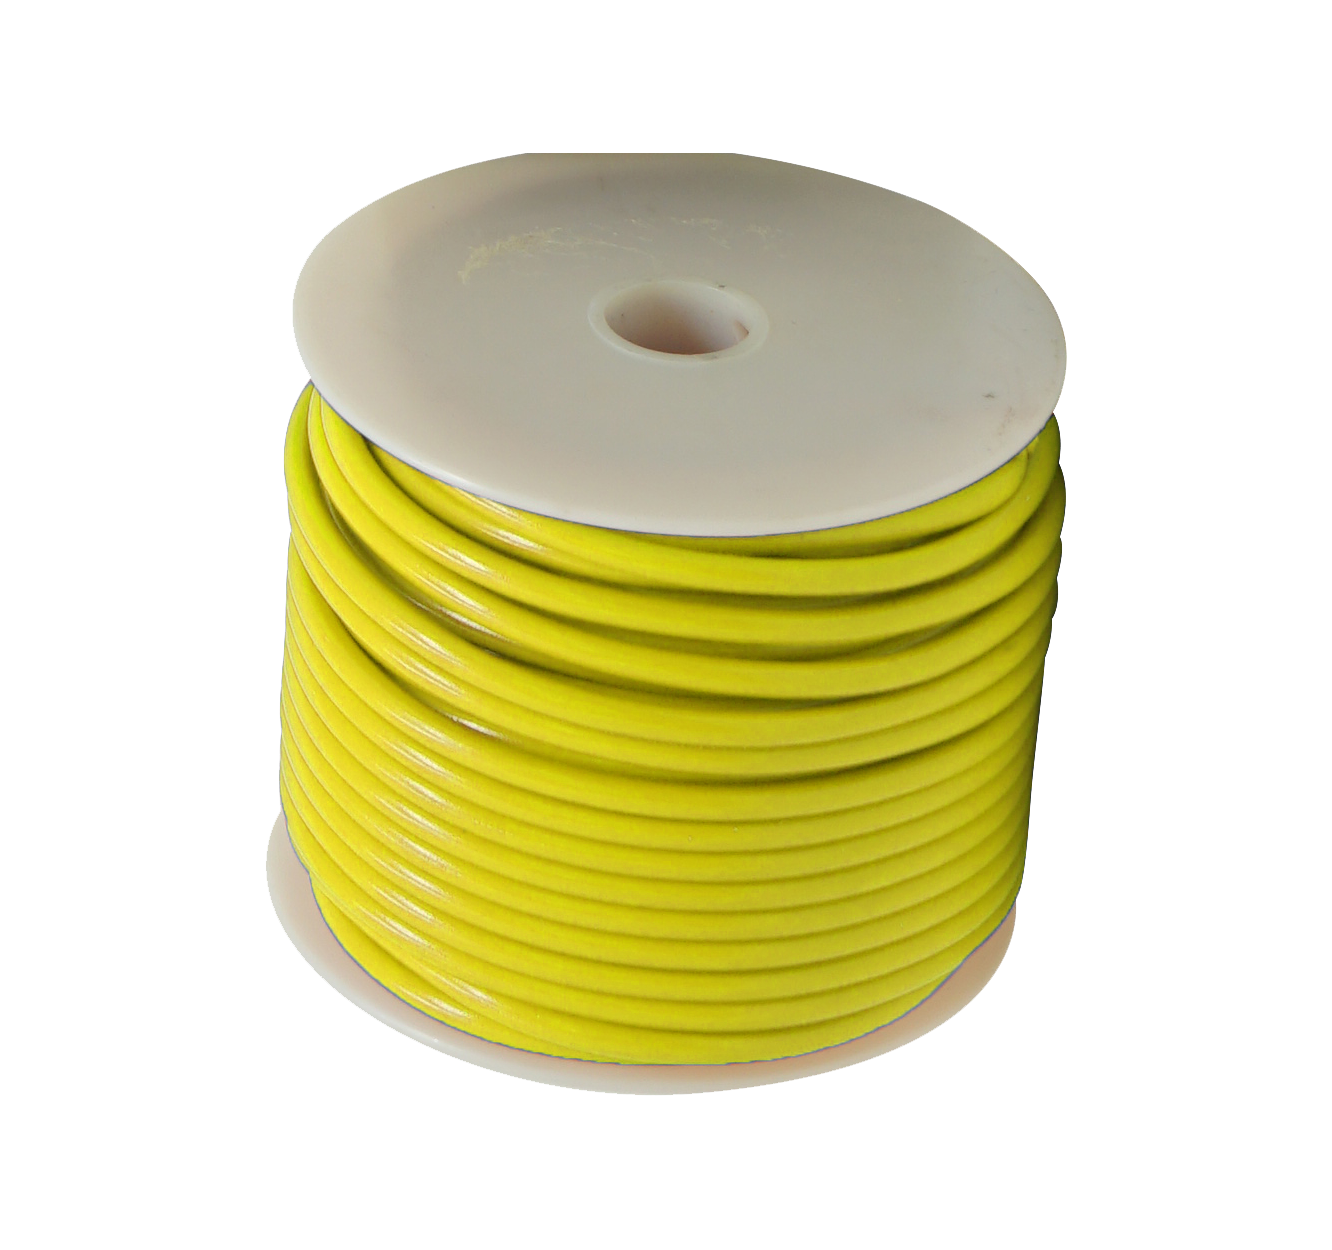 WIRE26-YEL Graves RC Hobbies 26 Gauge Wire - Yellow - 1 ft